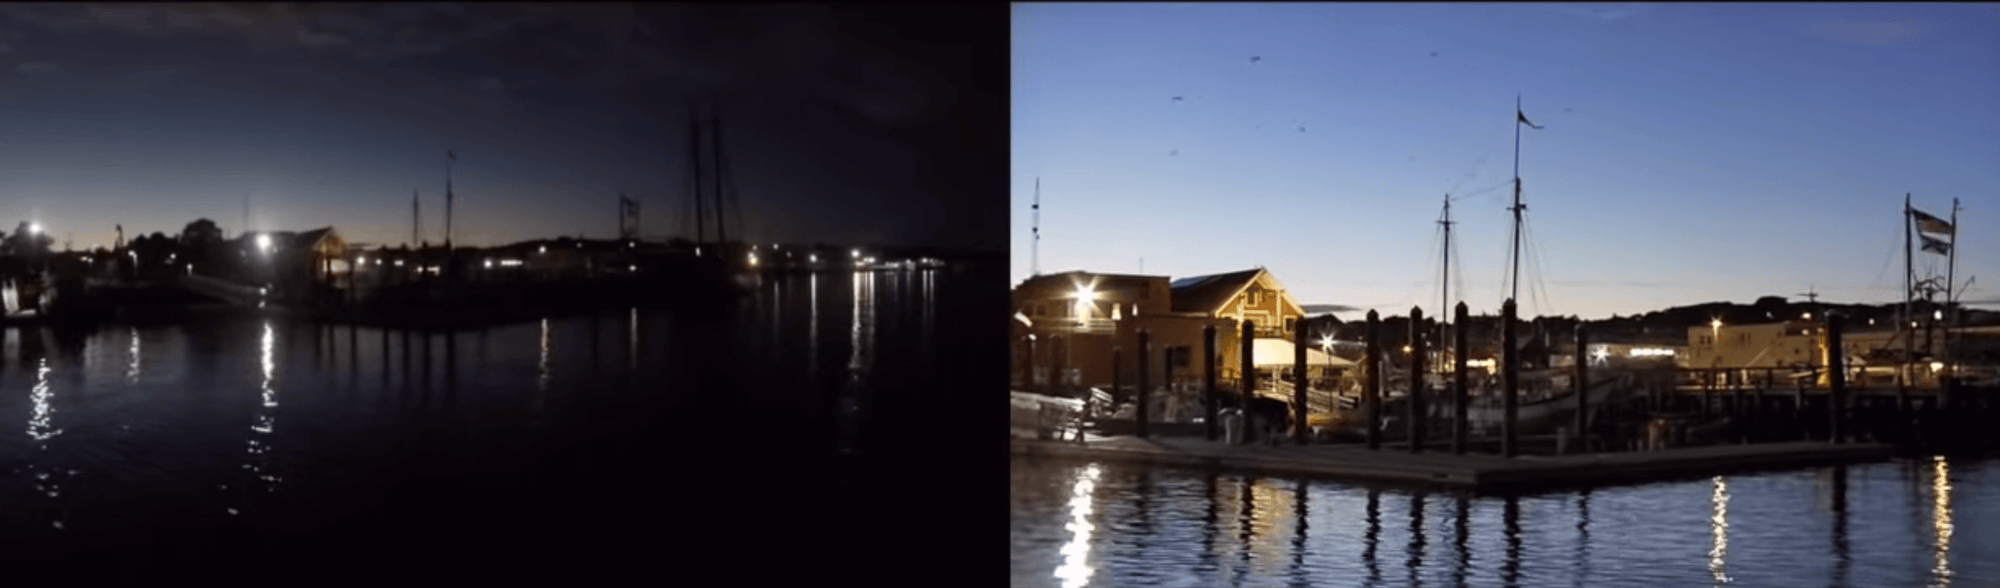 Boating At Night with SiOnyx Night Vision by BoatUS